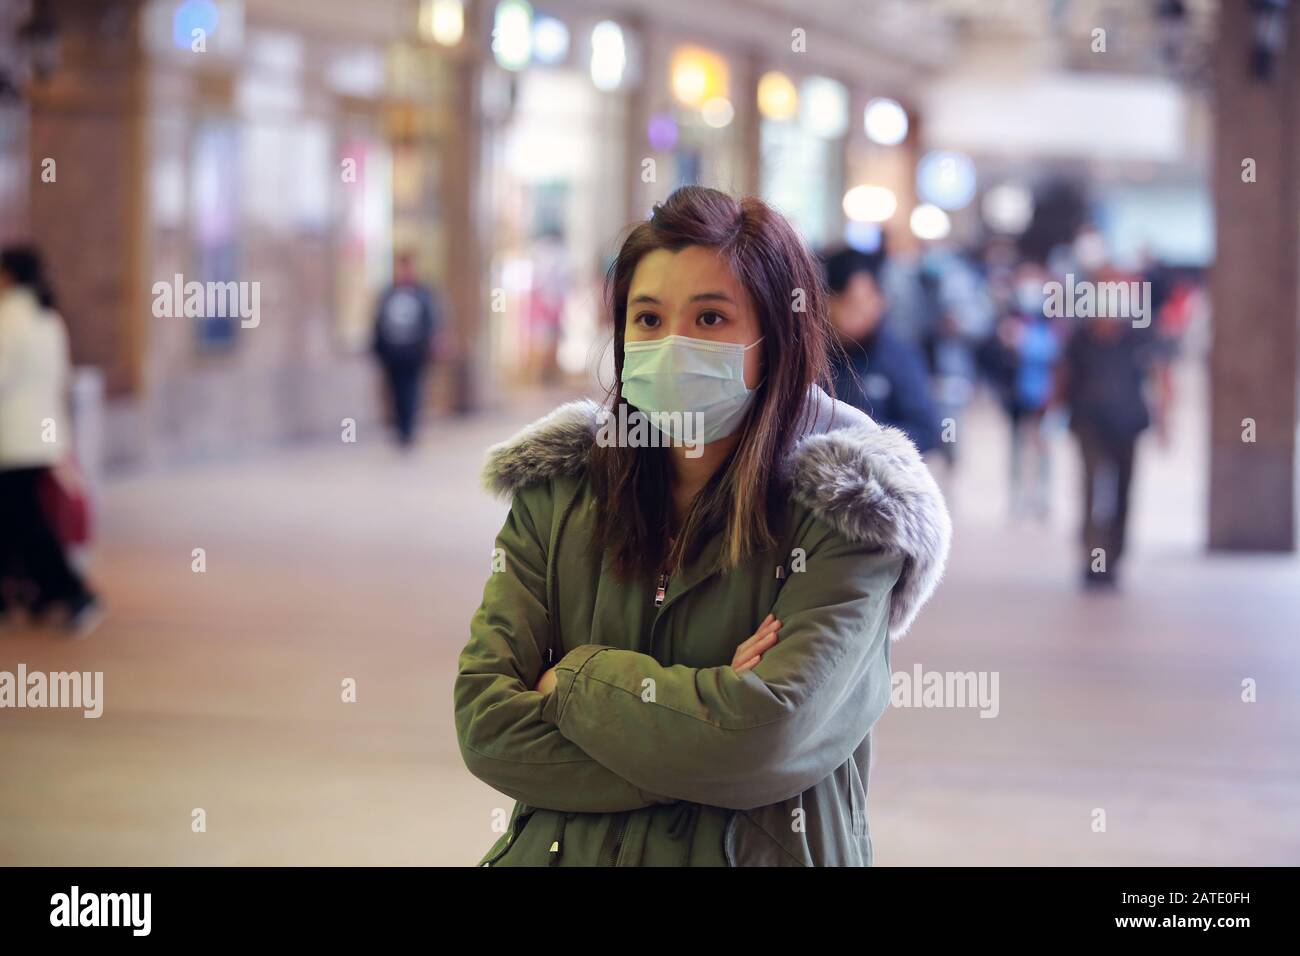 masked girl to protect herself from wuhan virus in public area Stock Photo